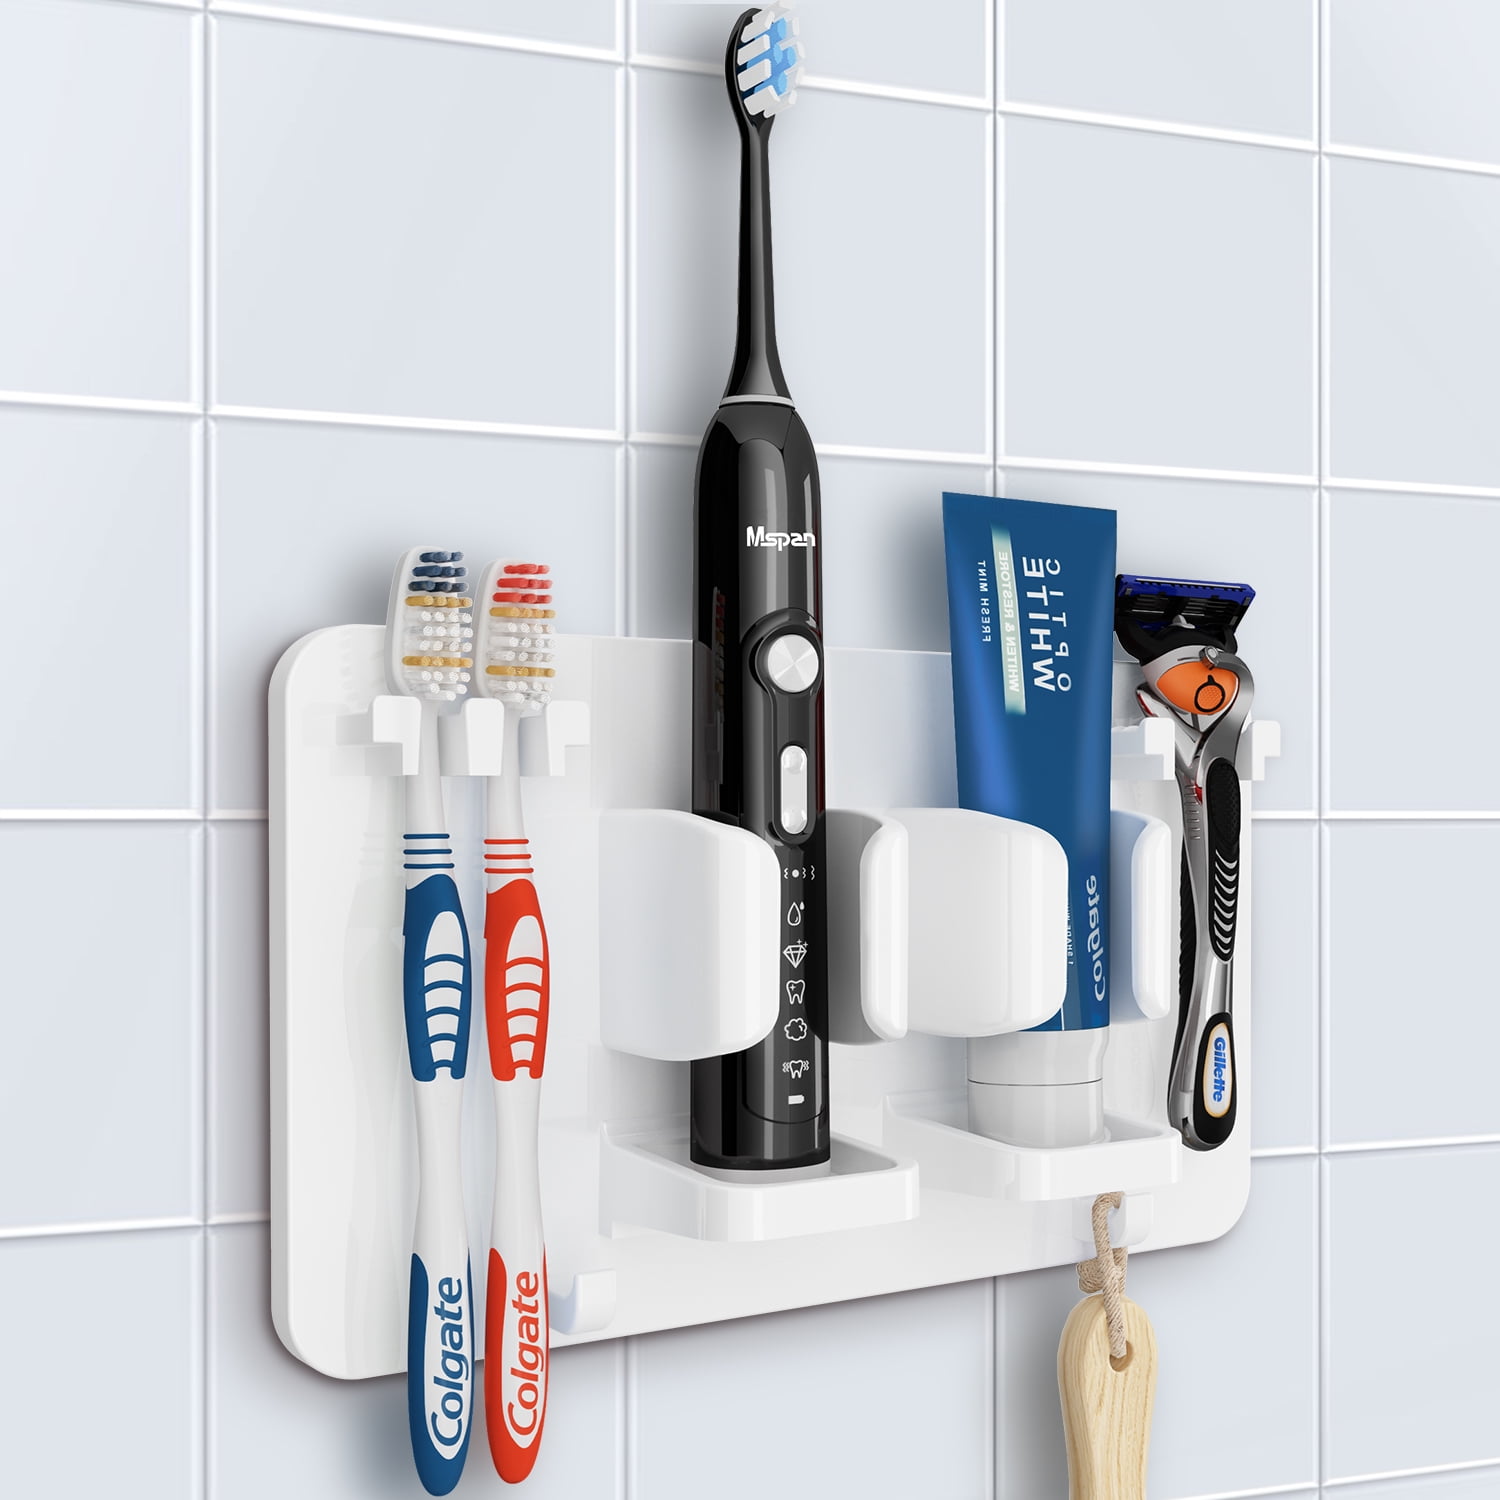 LIGHTSMAX Gray Silicone Toothbrush Holder for Bathroom - Wall-Mounted,  Waterproof, and Travel-Friendly - Ideal for Storing Toothbrushes and  Cosmetics in the Toothbrush Holders & Tumblers department at